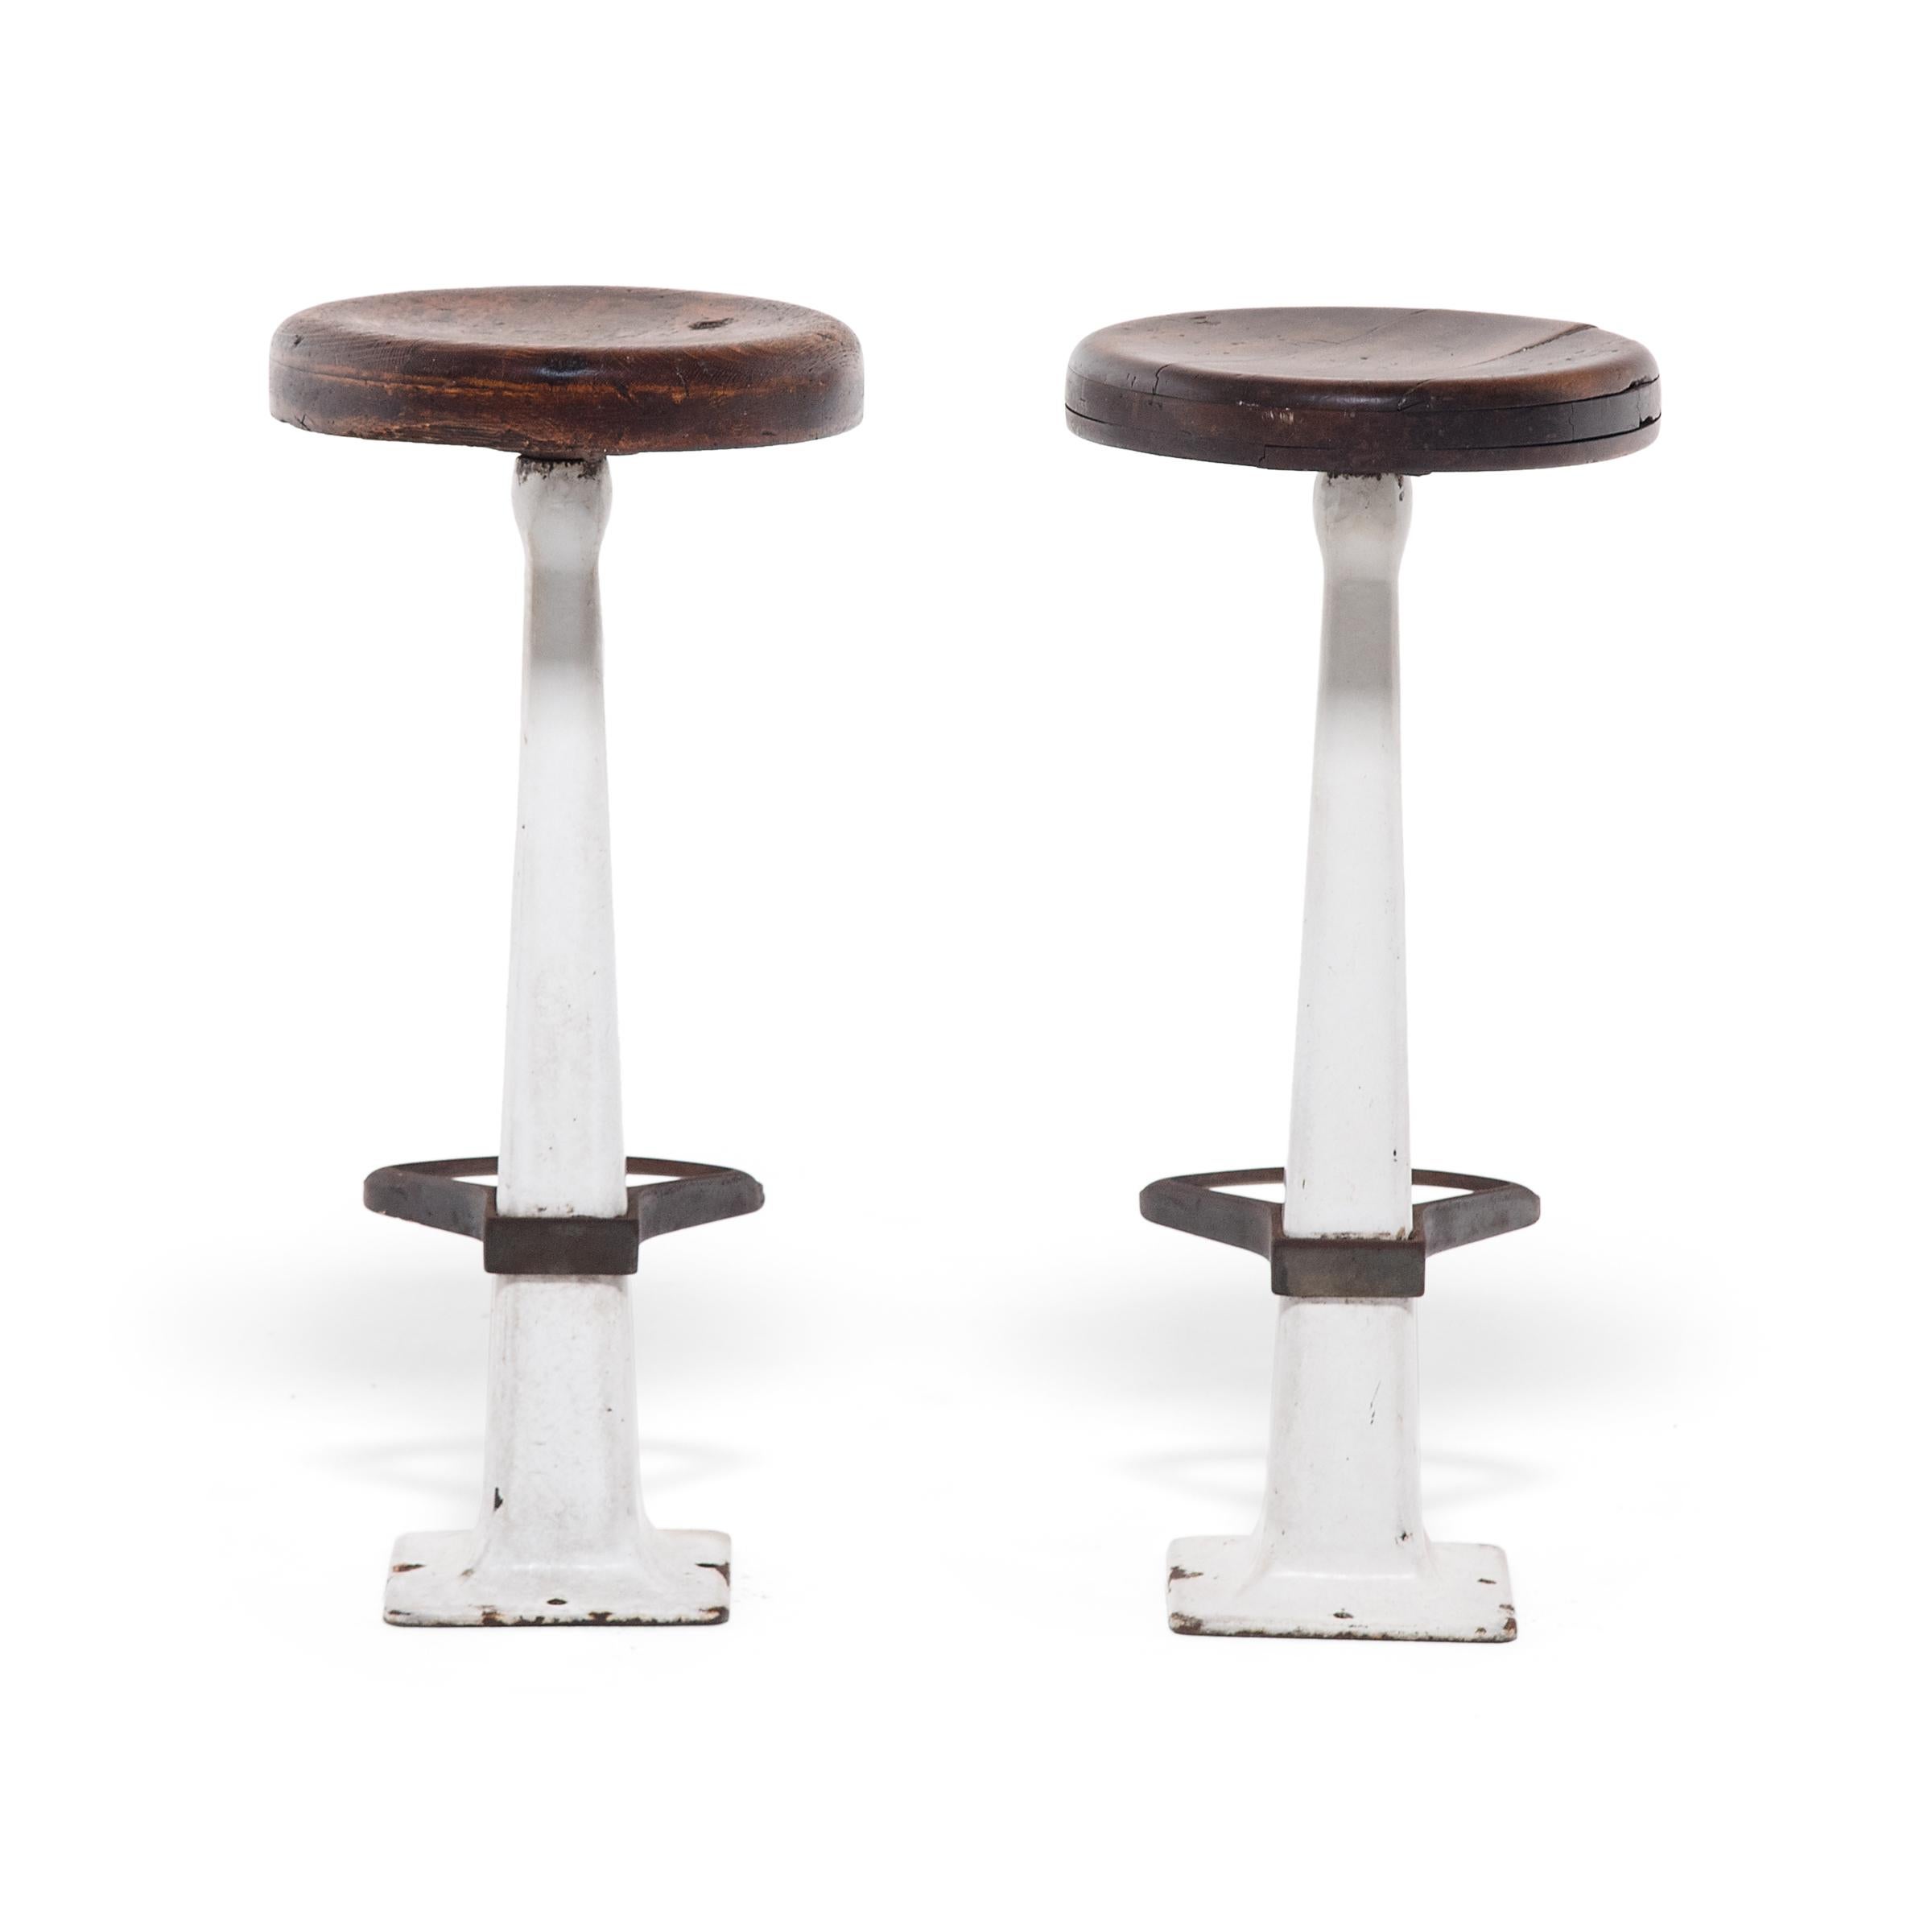 American Pair of Porcelain Enamel Soda Fountain Stools with Wood Seats, circa 1930s